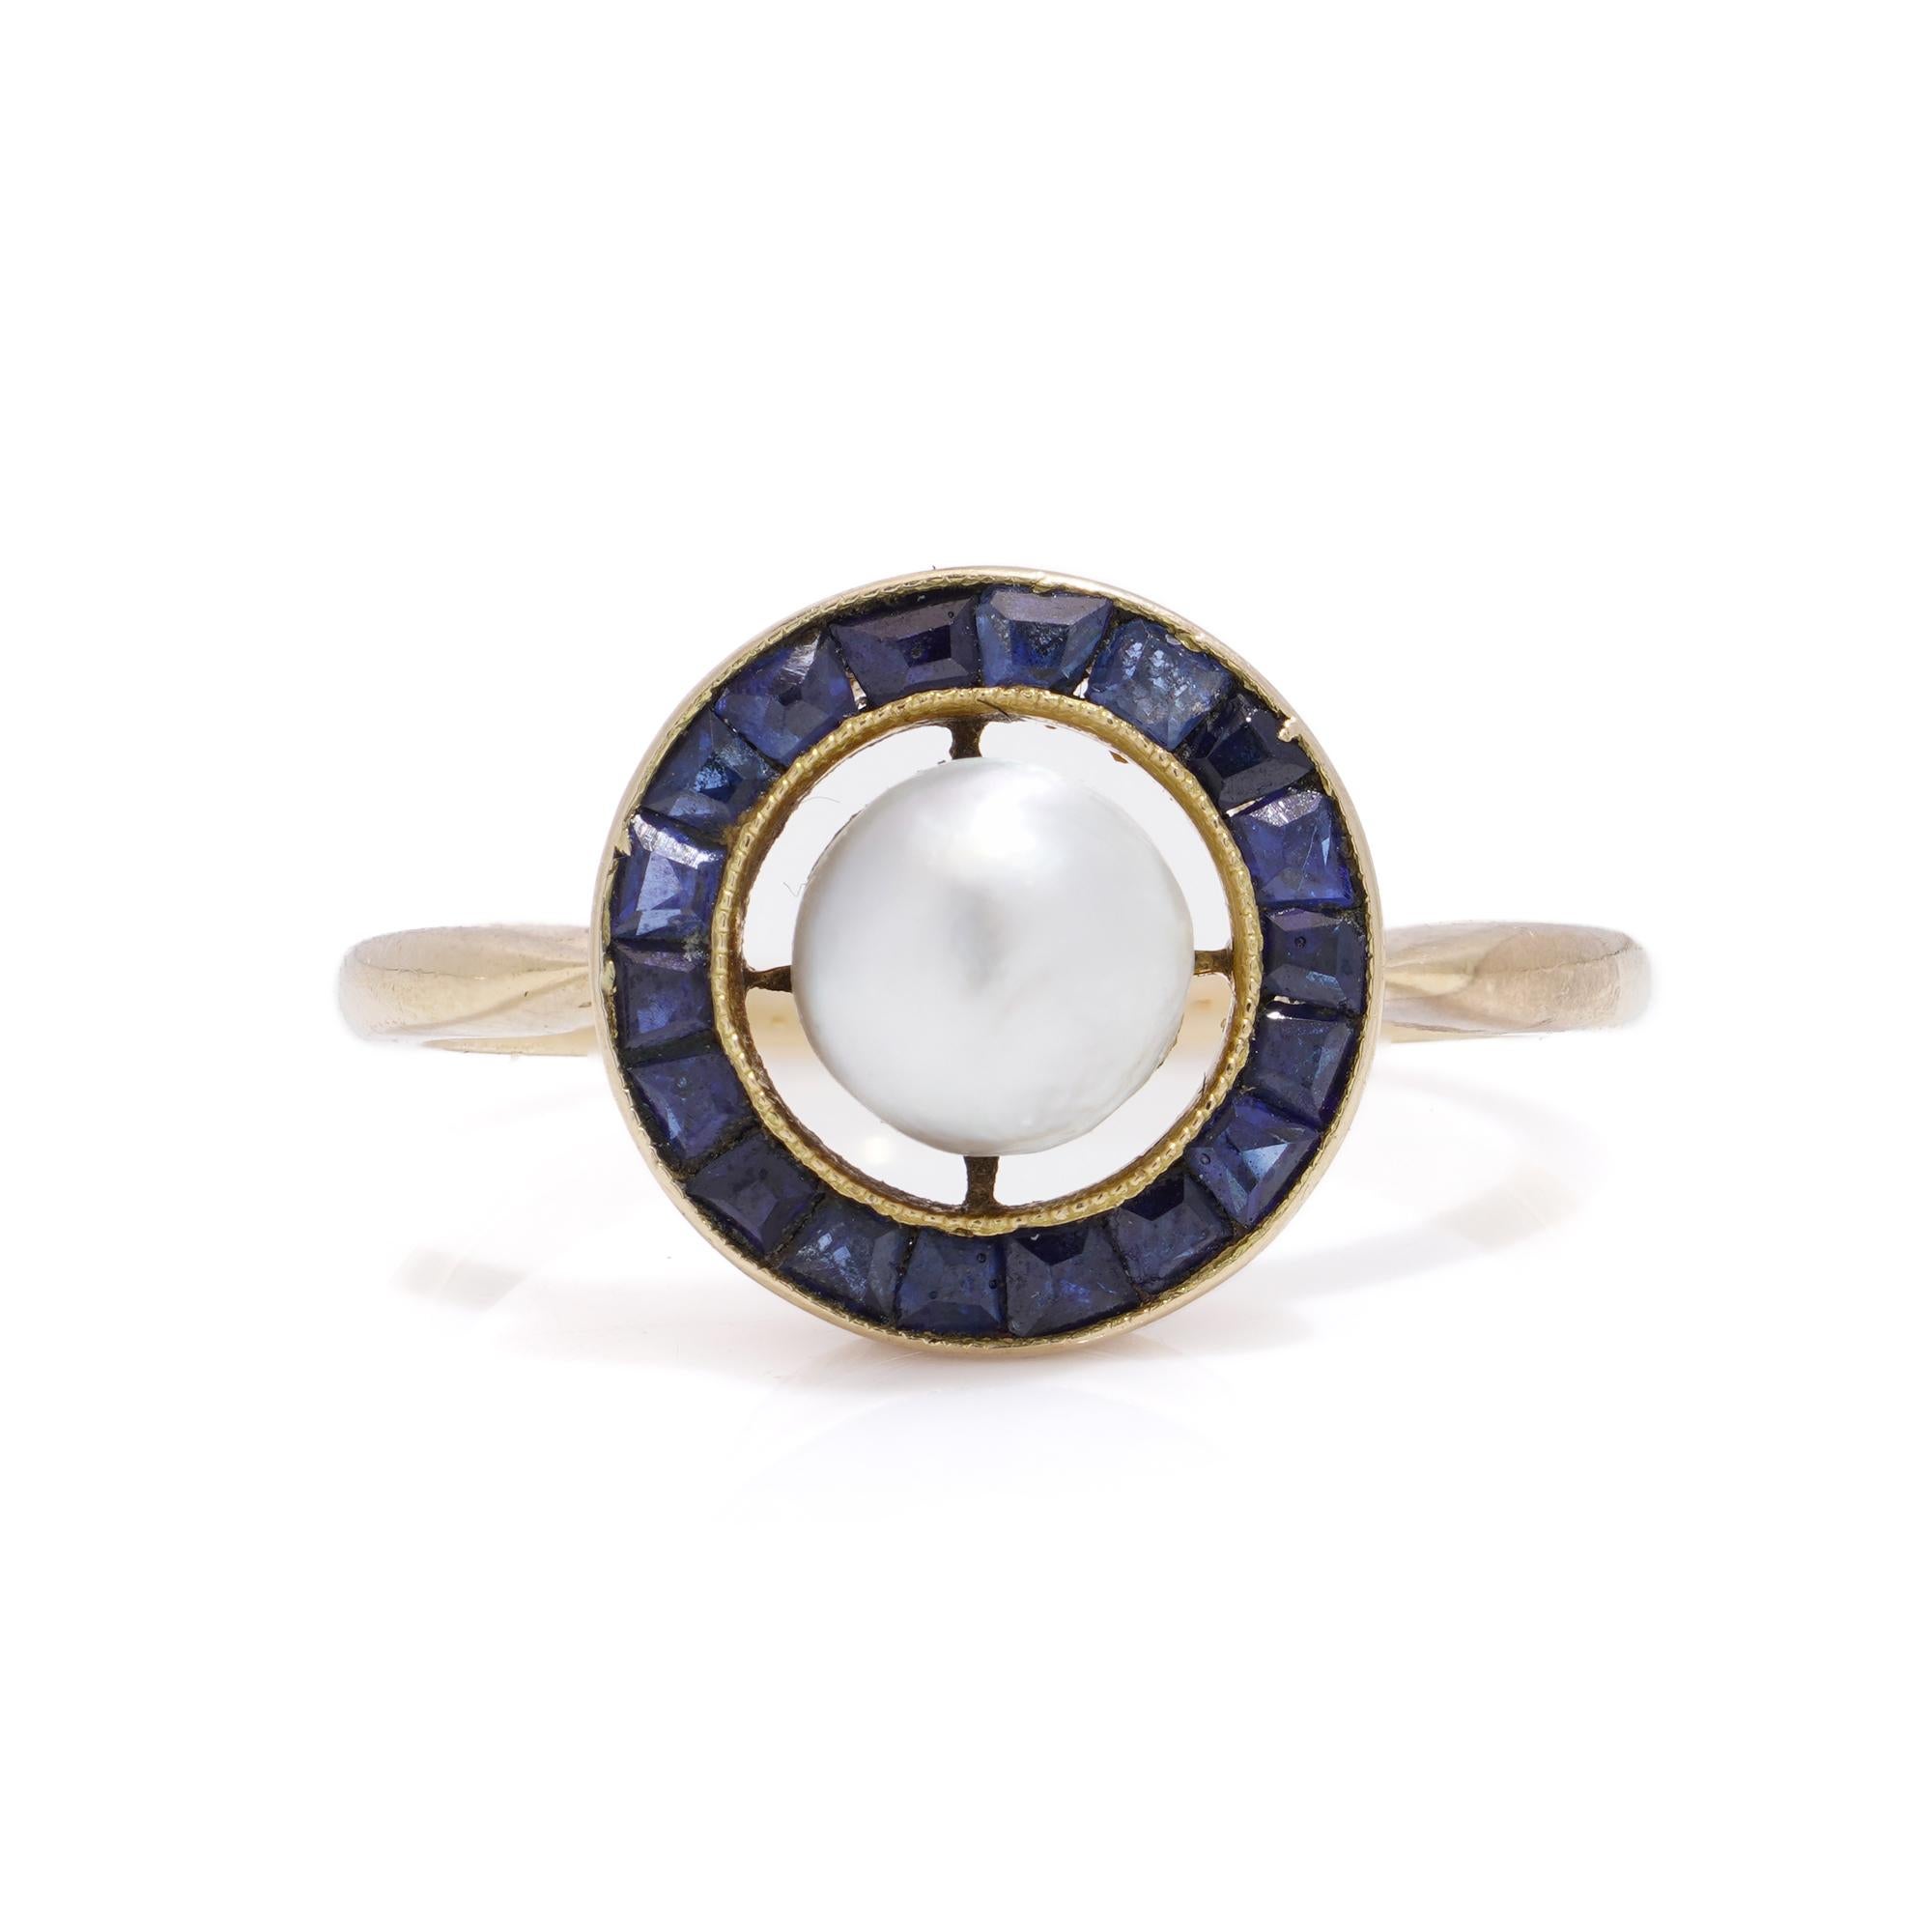 Art Deco 18kt rose gold pearl and sapphire ladies ring.
Made in Europe, CA. 1920's 
X-ray tested positive for 18kt gold. 

Dimensions - 
Finger Size (UK) = K 1/2 (US) = 5.75 (EU) = 52.5 
Weight: 3.00 grams

Sapphires - 
Cut: Calibre 
Quantity of